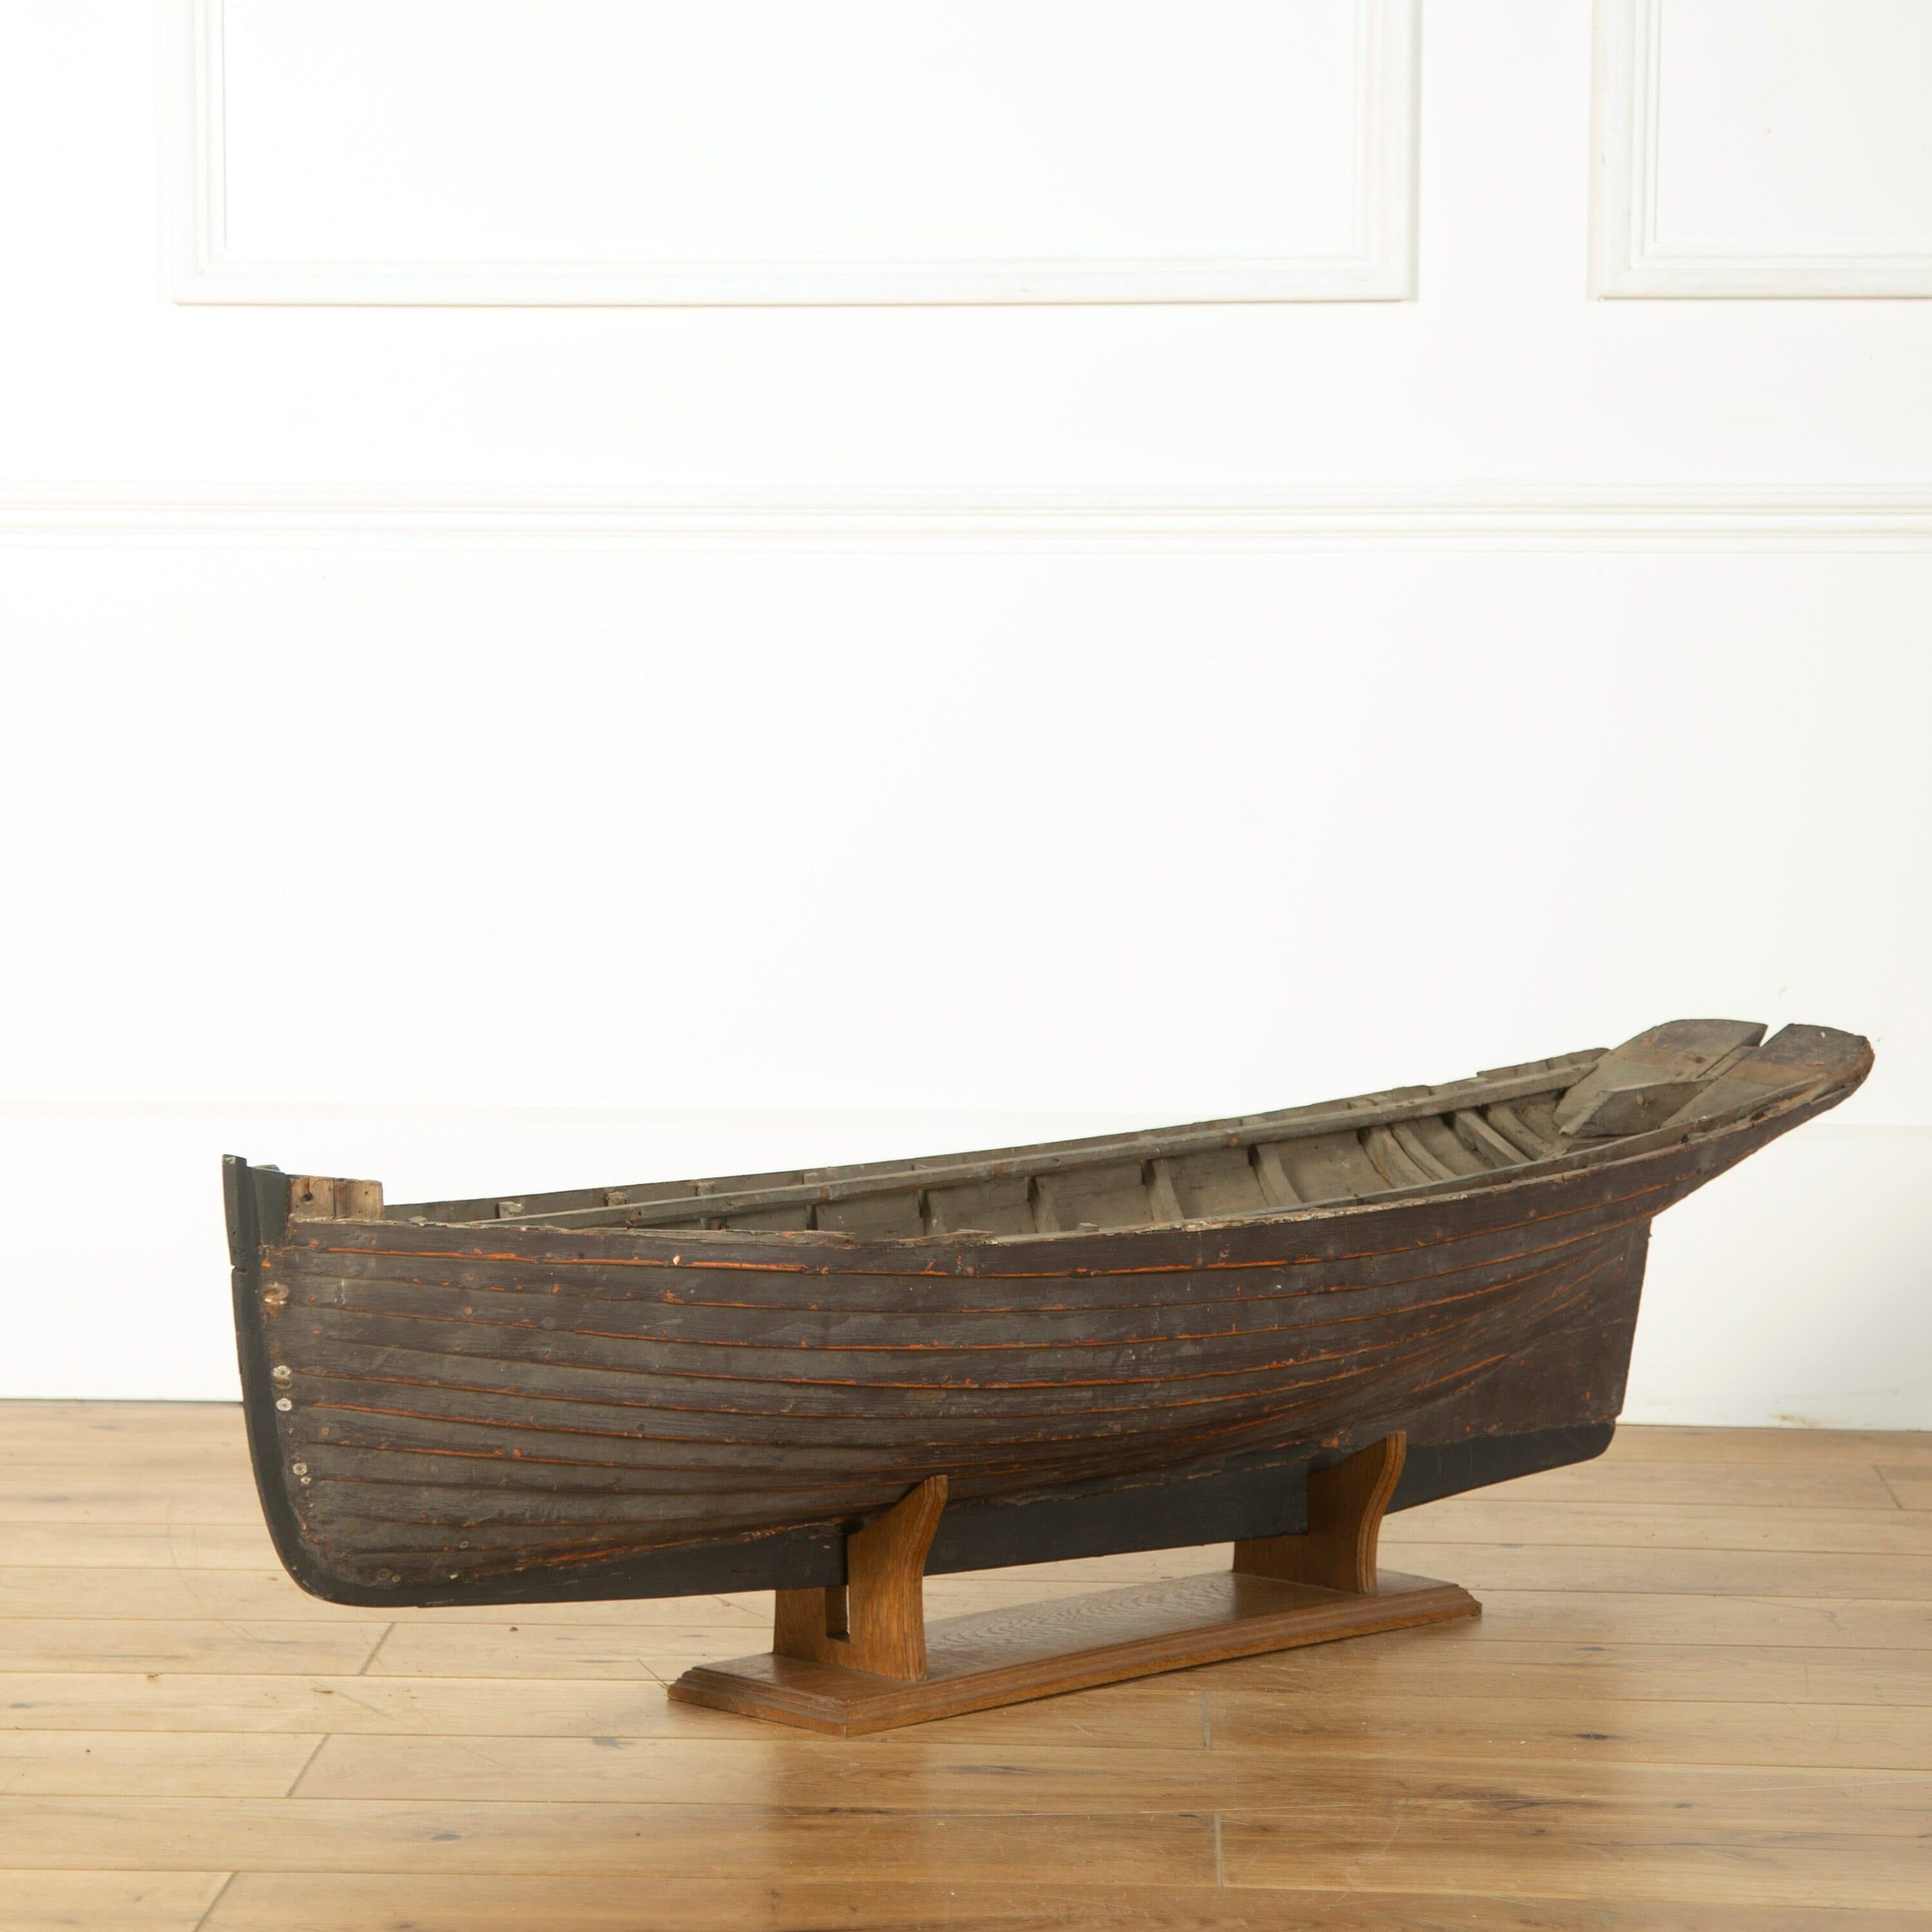 Wooden clinker built boat hull on stand of grand scale, English, circa 1900, in lovely original dry patina.